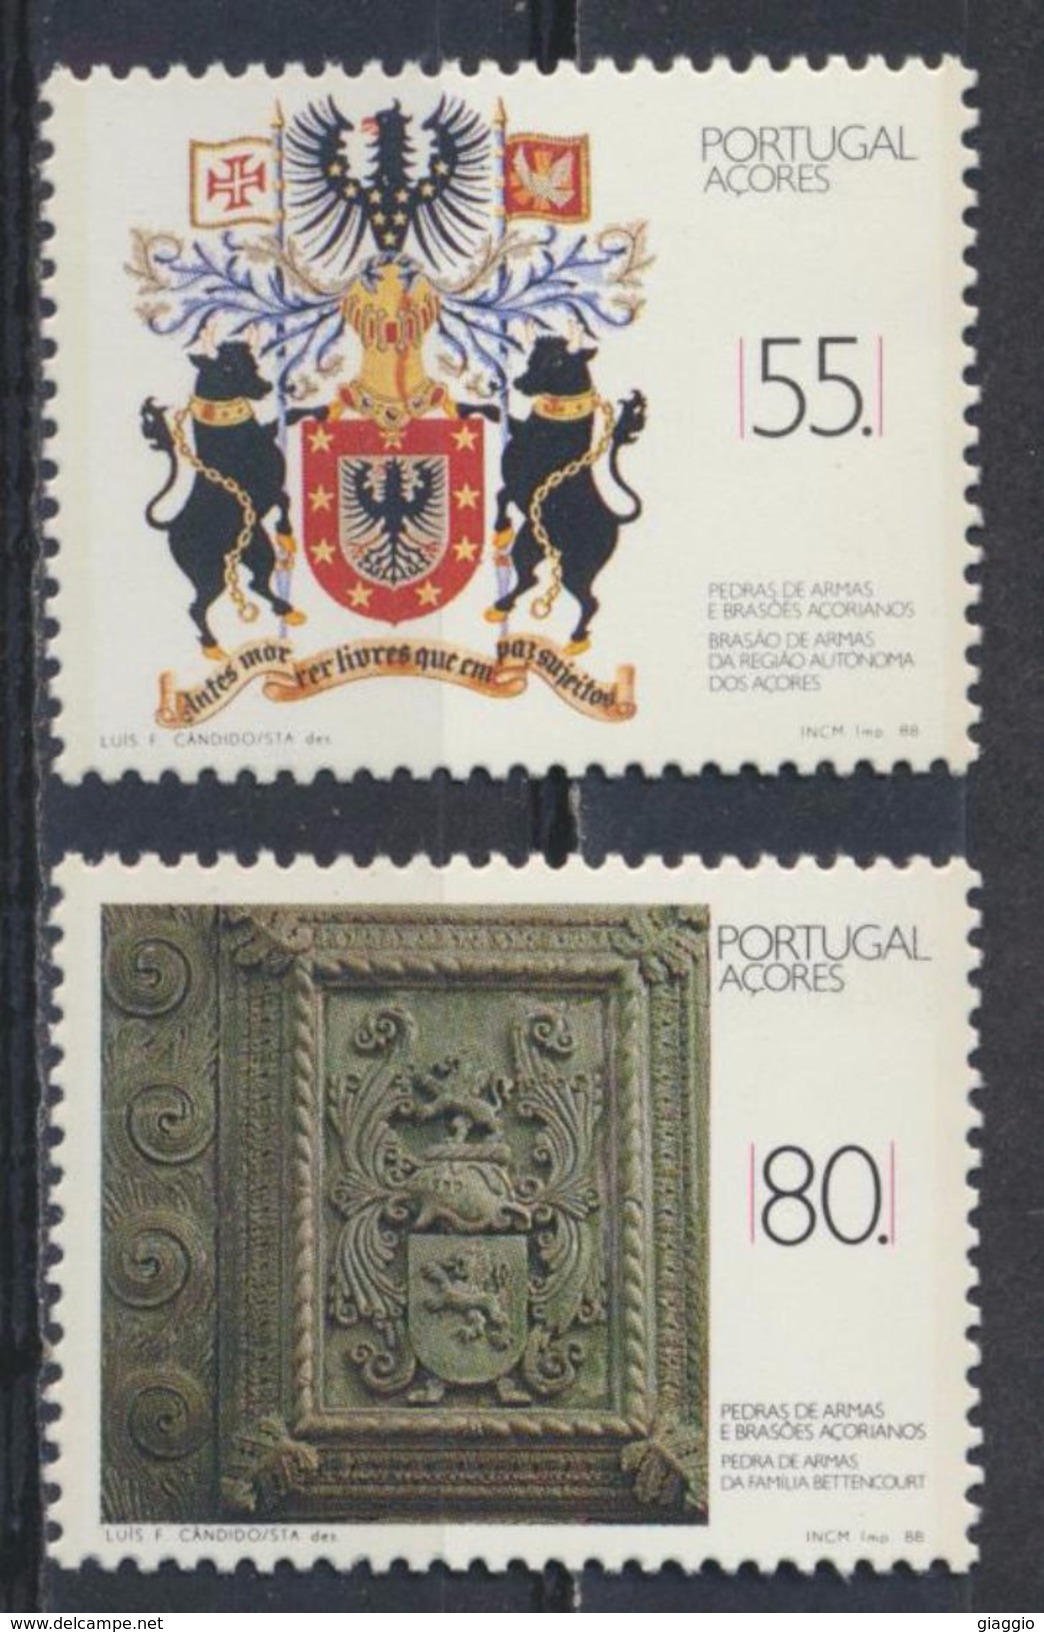 °°° PORTUGAL ACORES - Y&T N°385/86 - 1988 MNH °°° - Azores